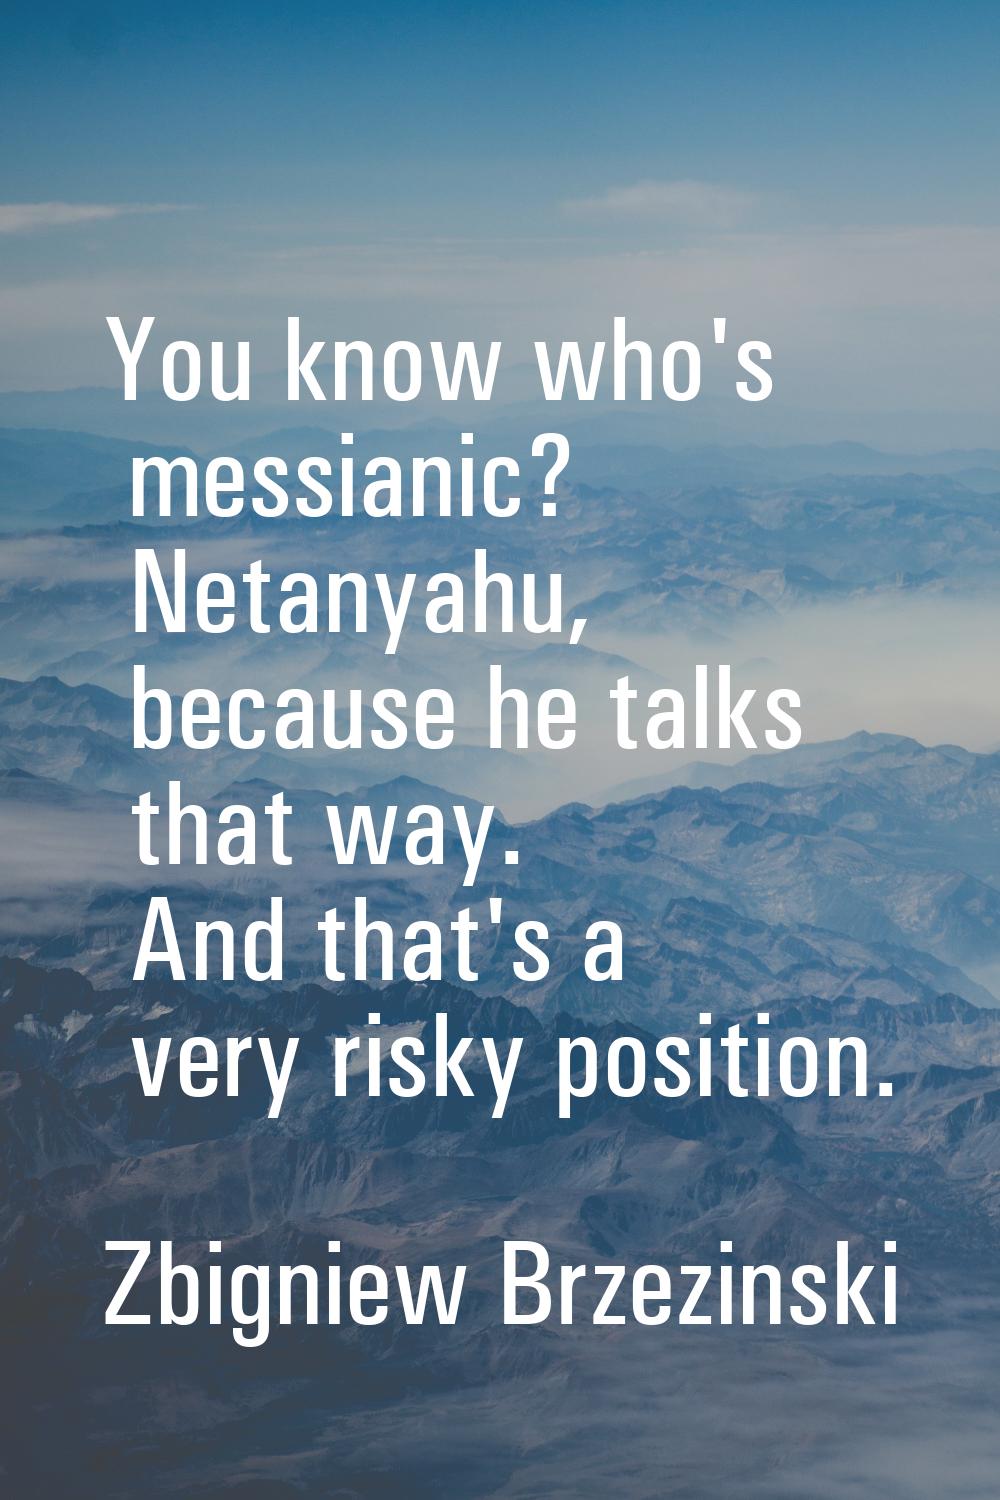 You know who's messianic? Netanyahu, because he talks that way. And that's a very risky position.